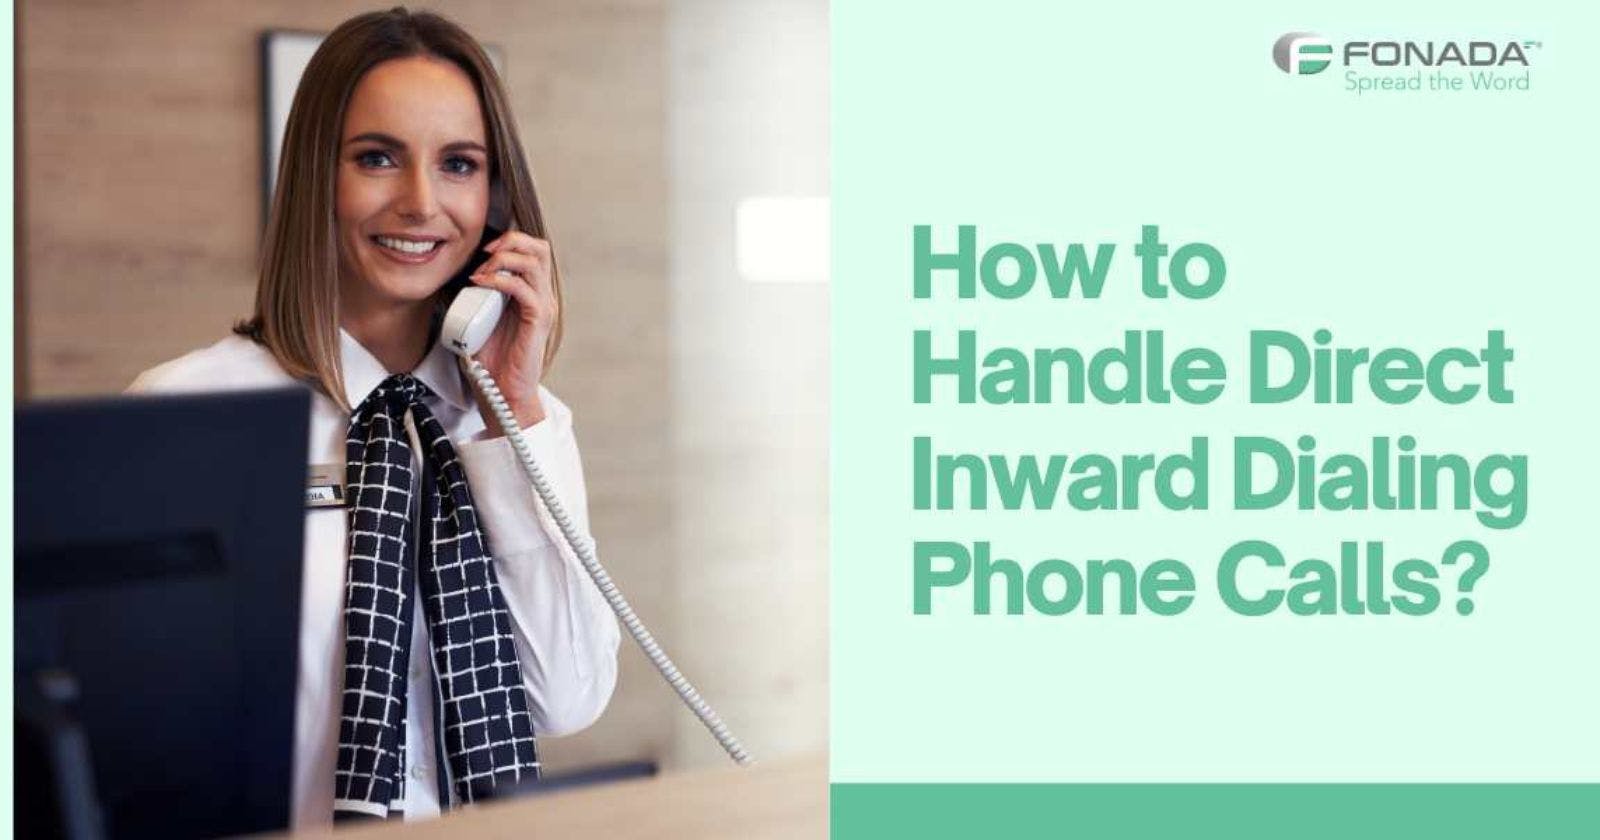 How to Handle Direct Inward Dialing Phone Calls?